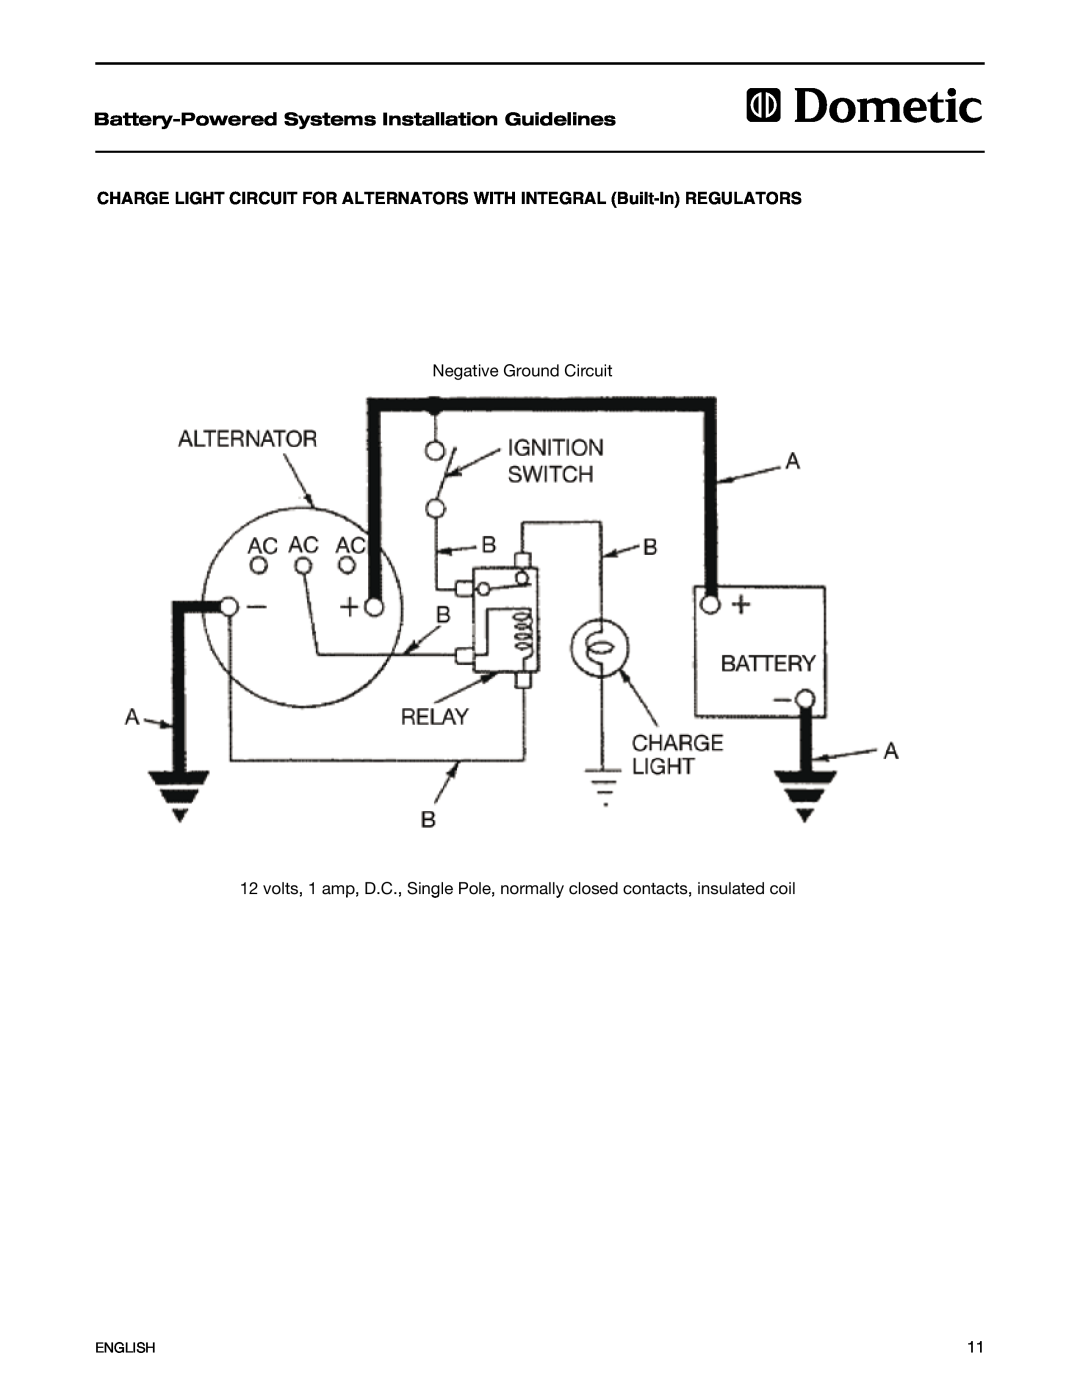 Dometic 2597 manual Battery-PoweredSystems Installation Guidelines, Negative Ground Circuit, English 